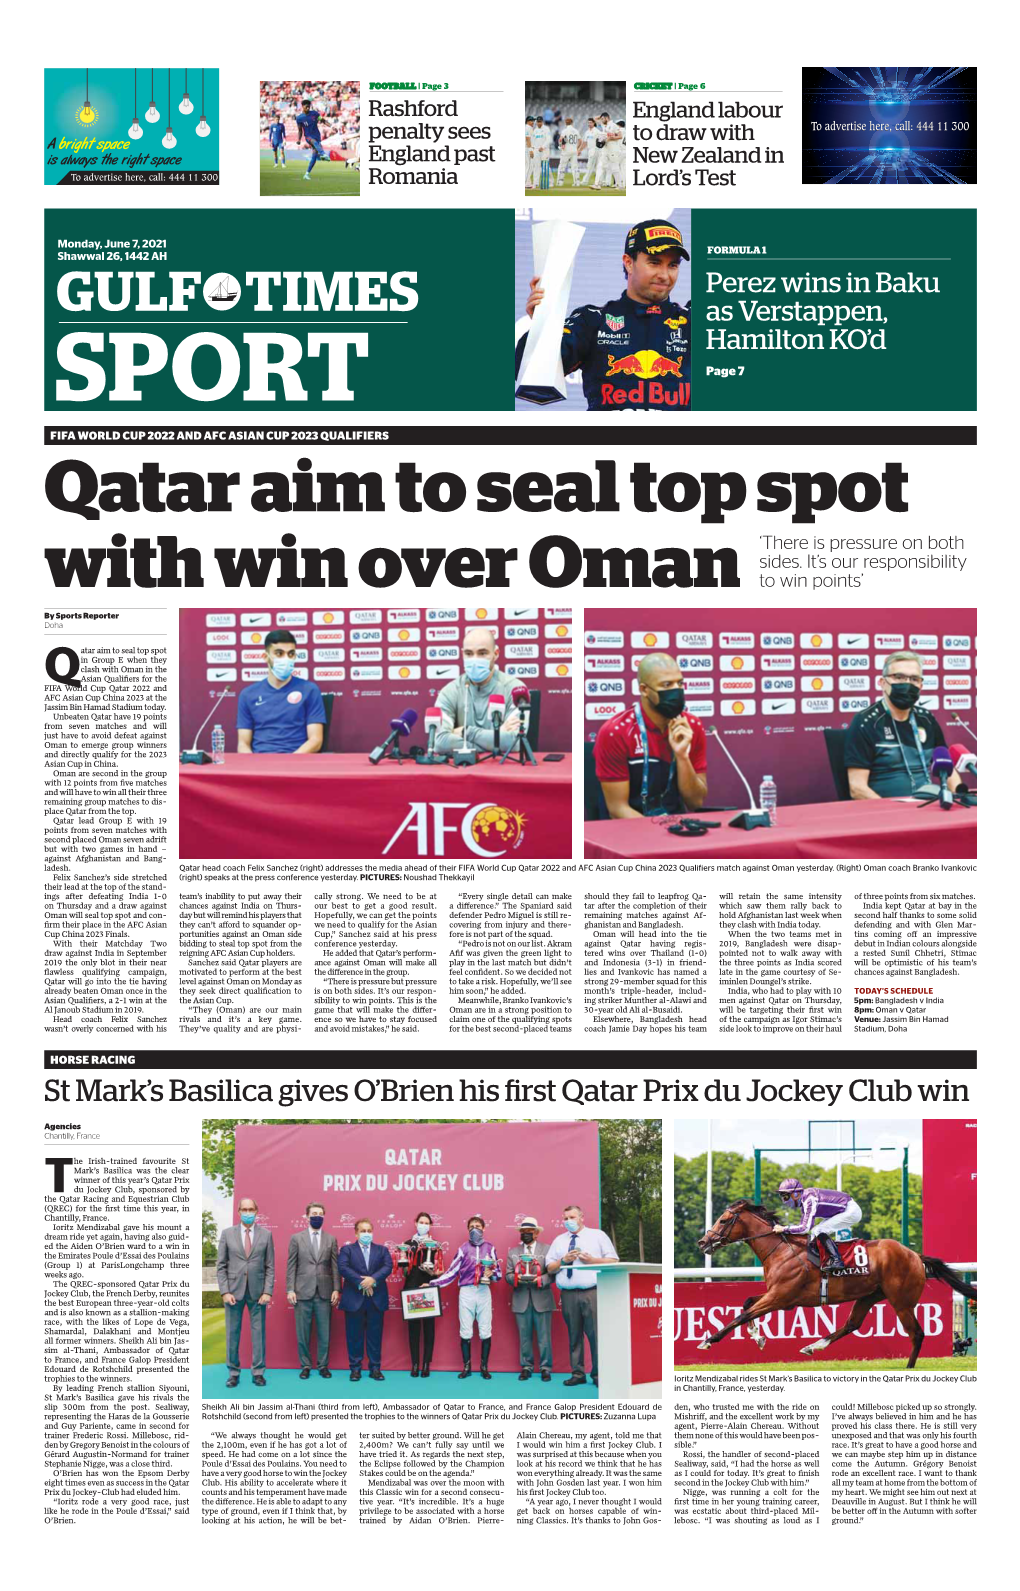 SPORT Page 7 FIFA WORLD CUP 2022 and AFC ASIAN CUP 2023 QUALIFIERS Qatar Aim to Seal Top Spot ‘There Is Pressure on Both Sides